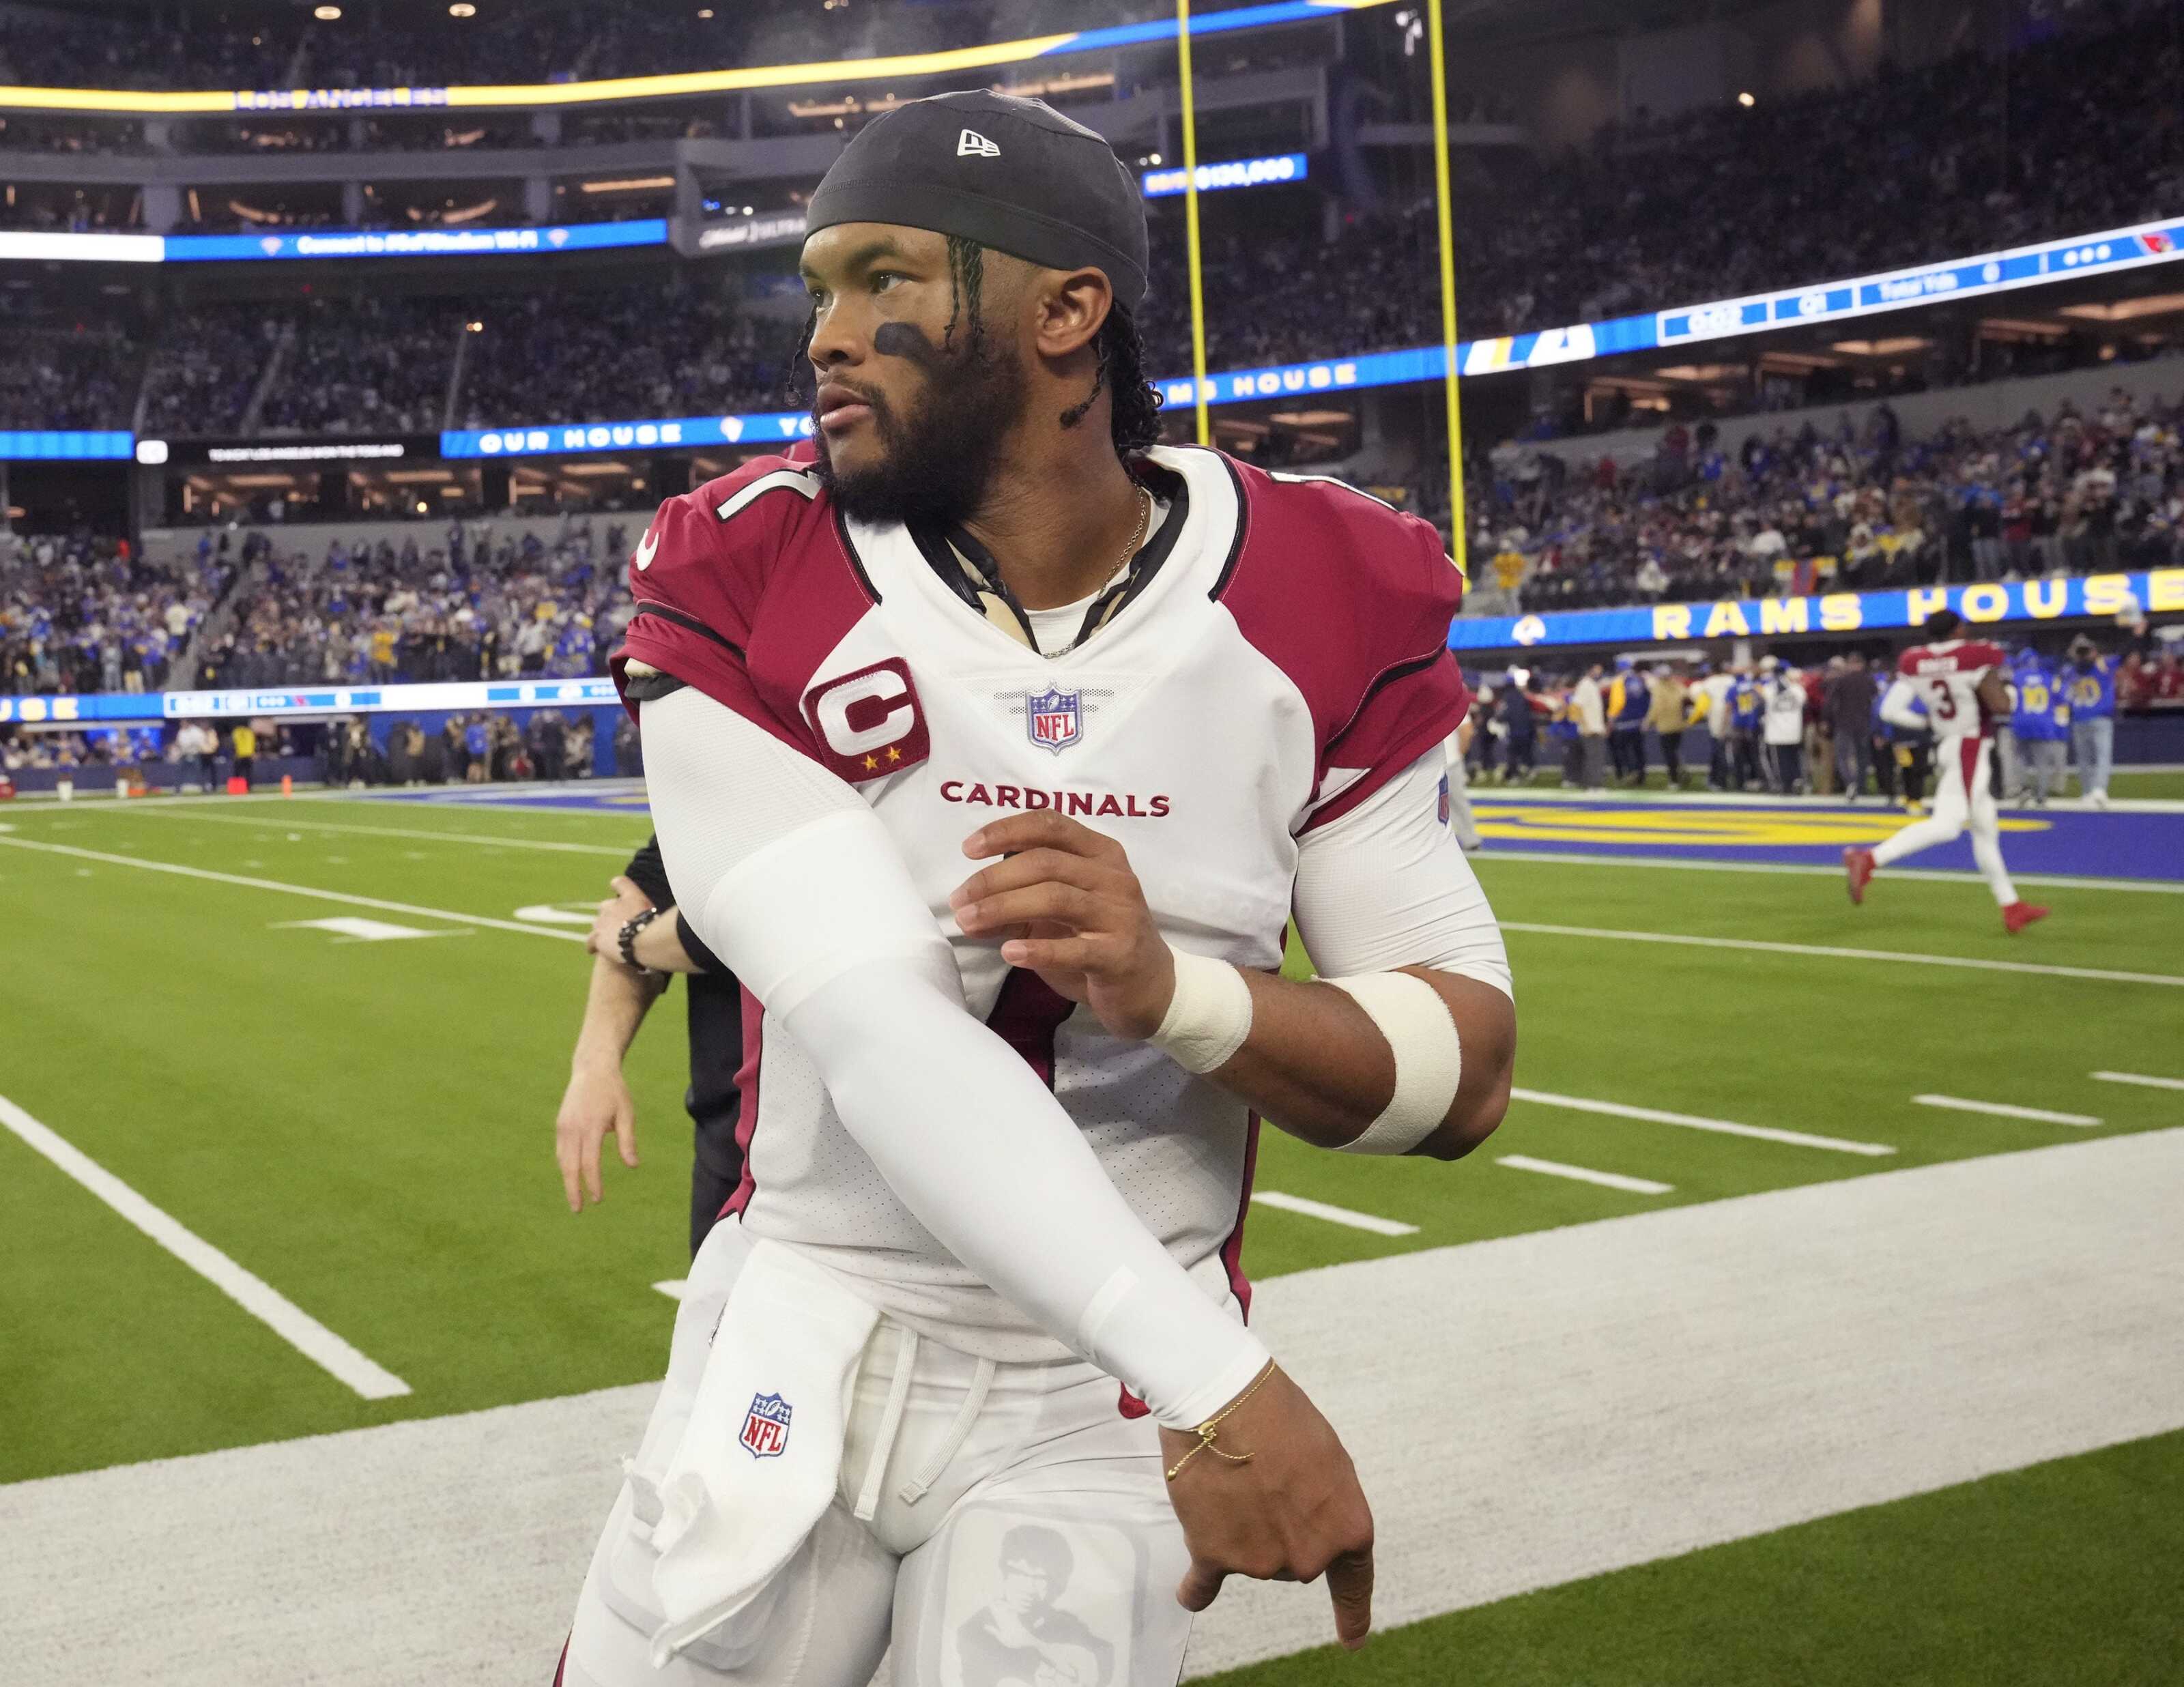 Kyler Murray, in Omaha cheering for Oklahoma, shares how much he misses  baseball